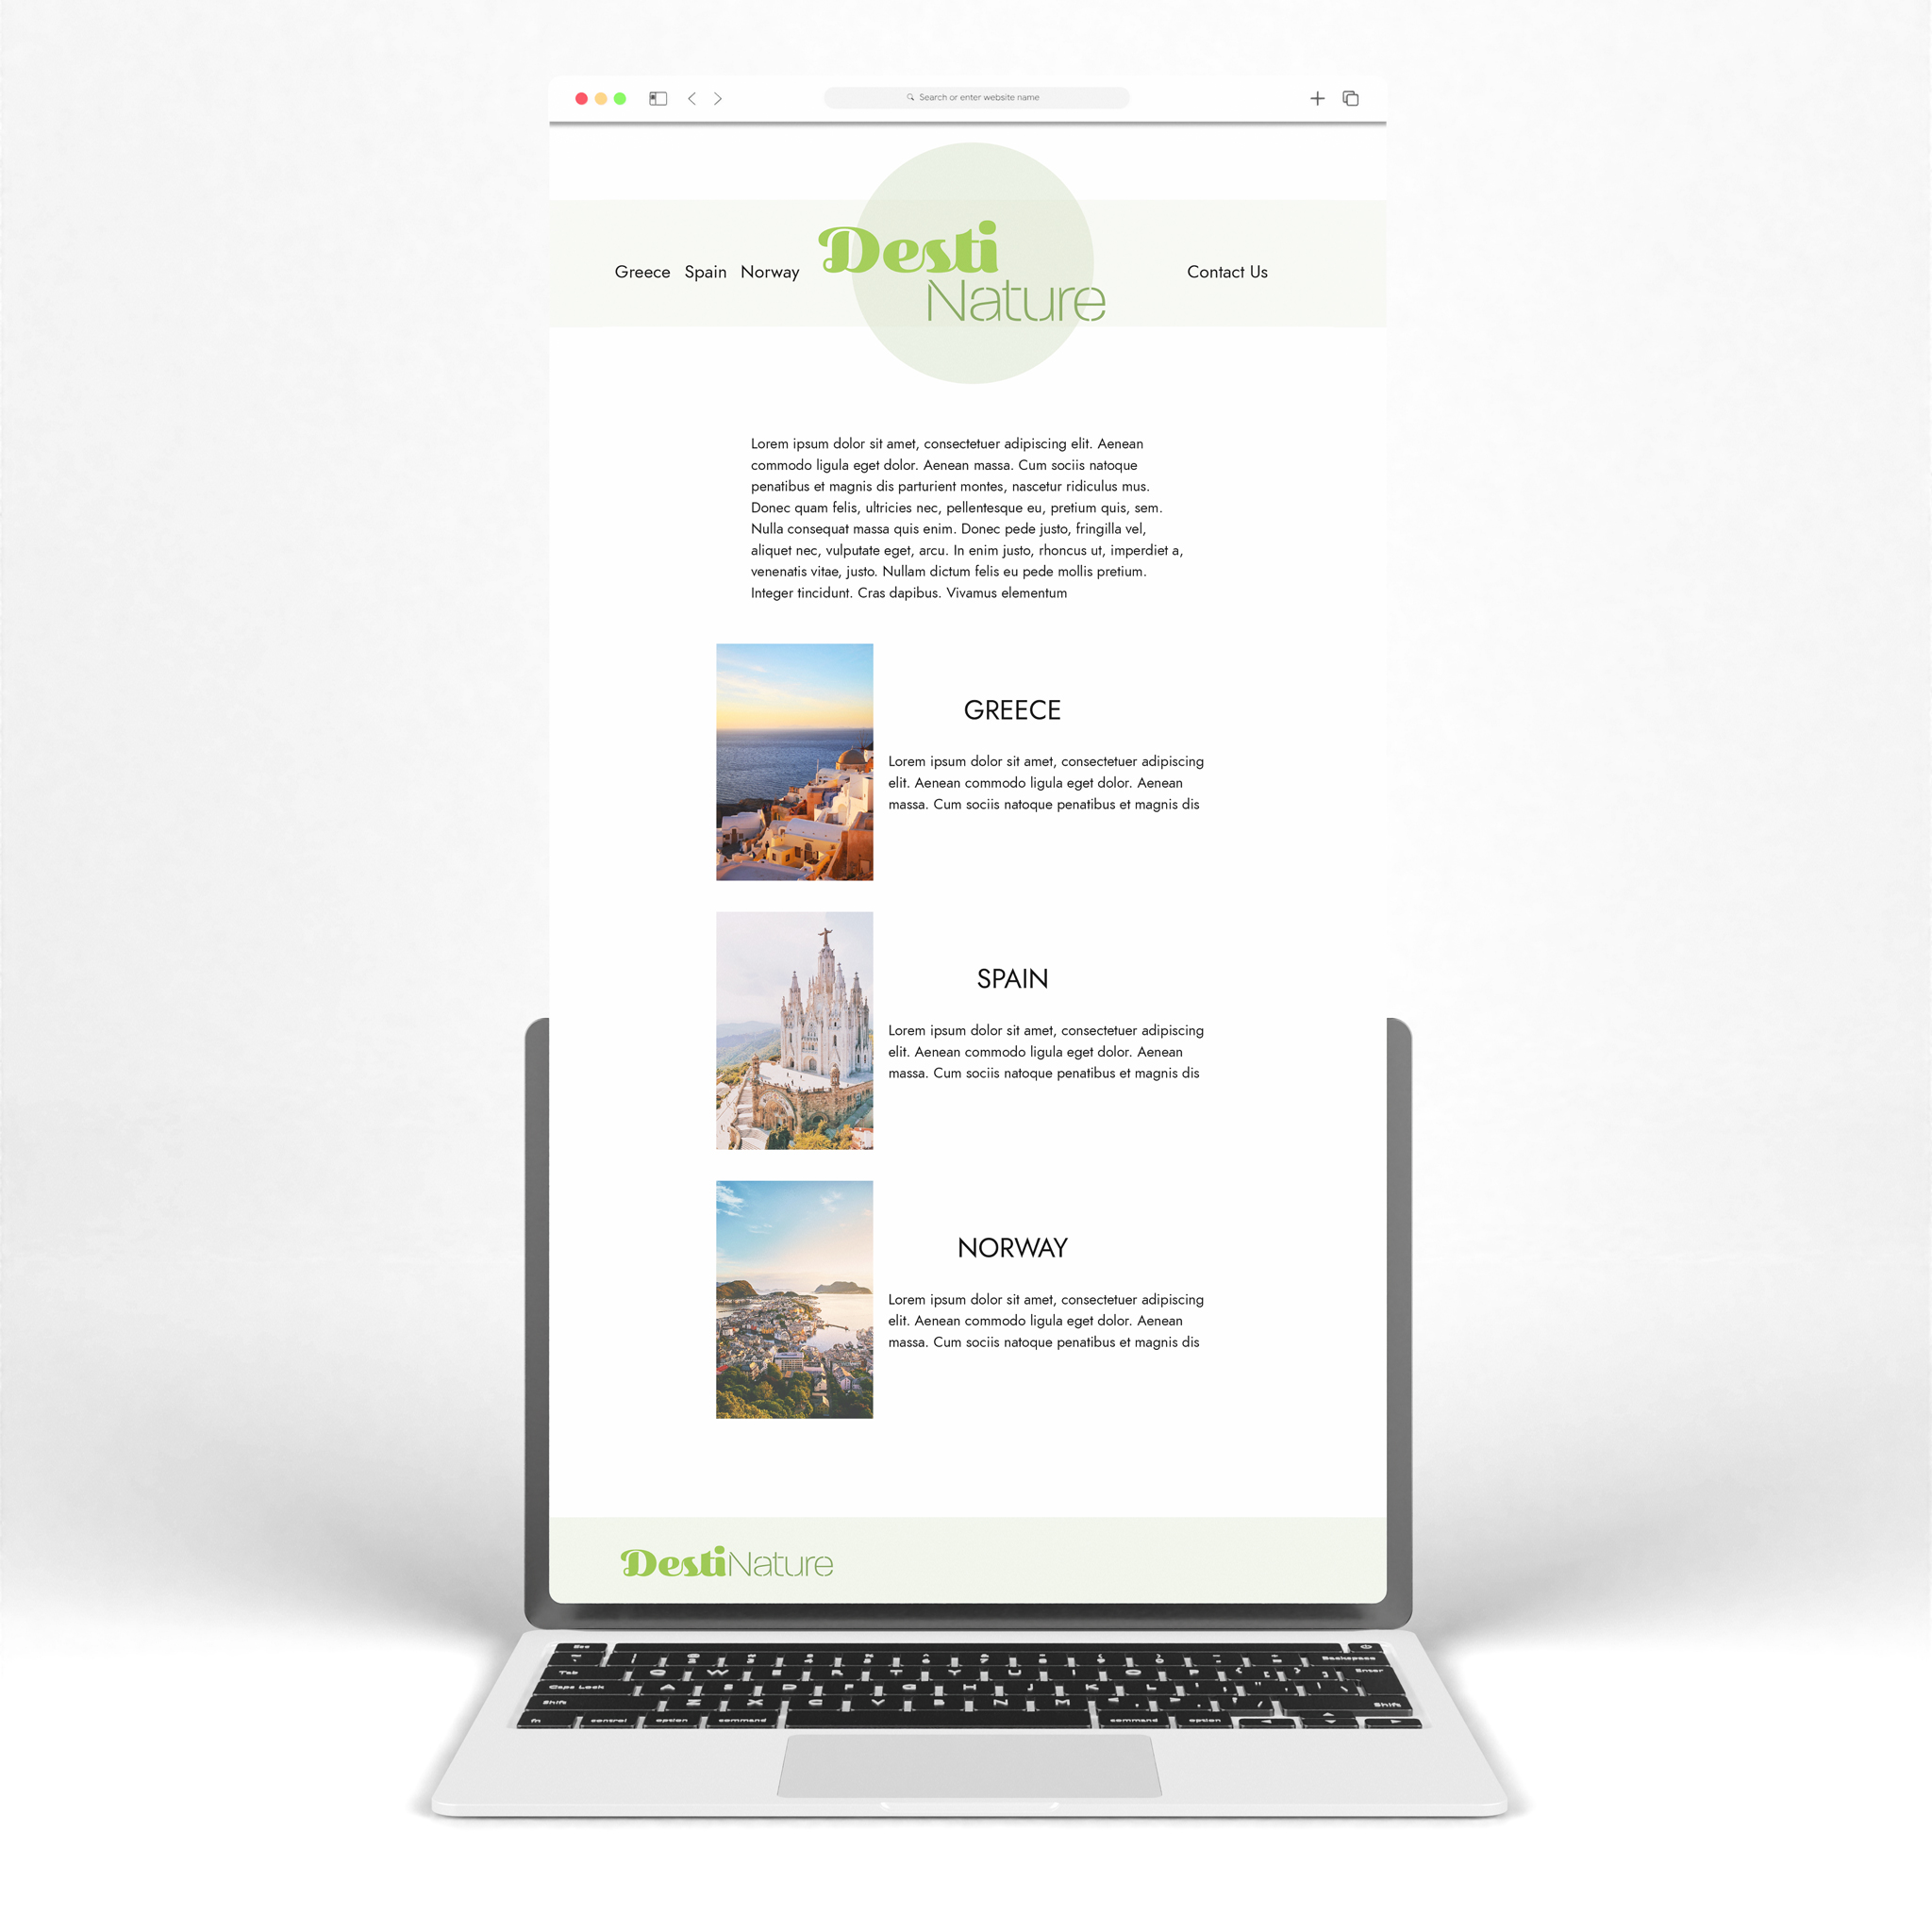 Mock up of a commercial travel website called Destinature